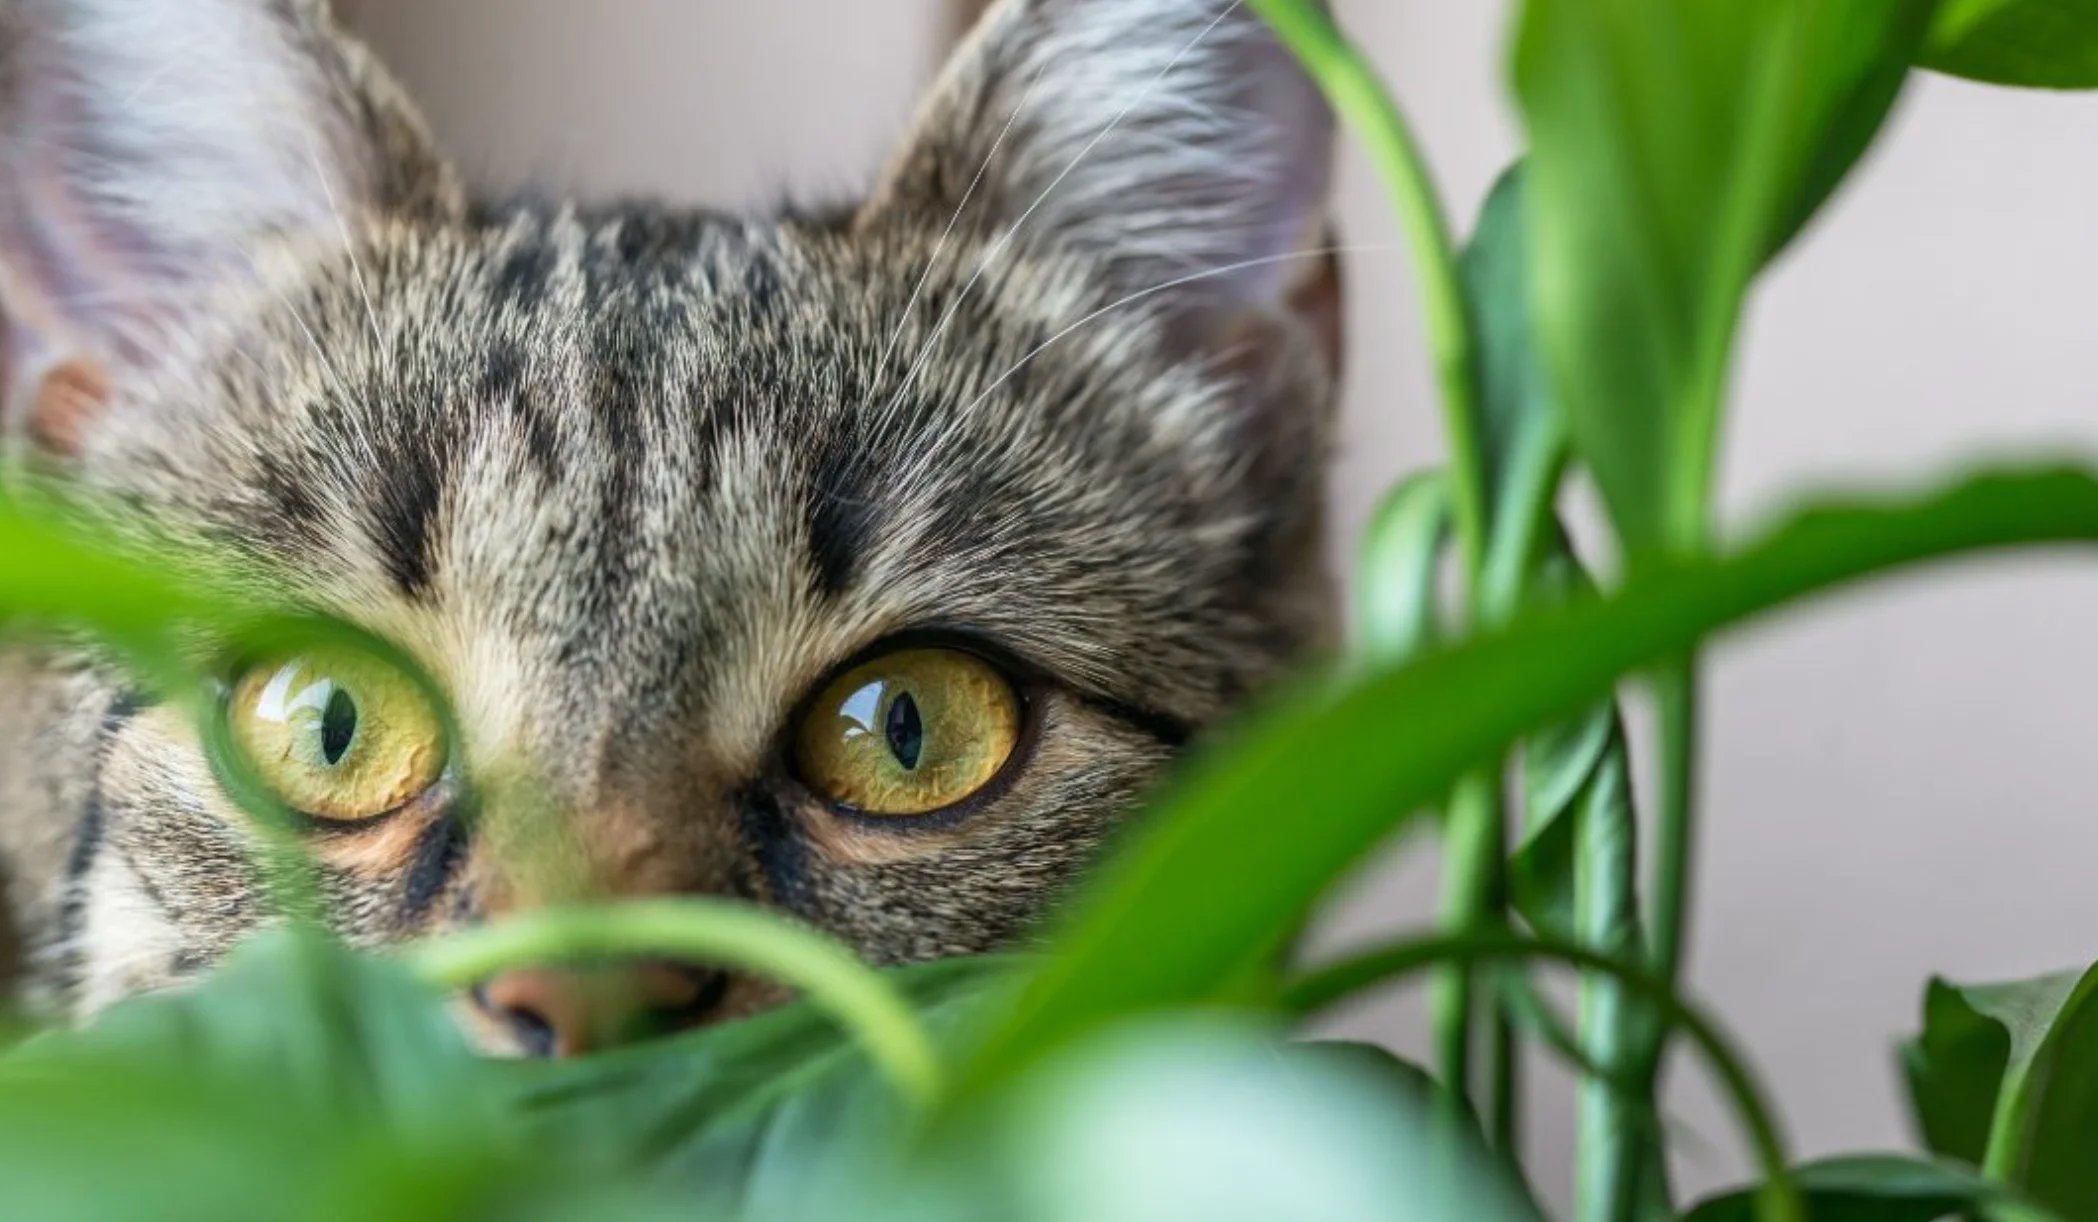 Are peace lilies toxic to cats?